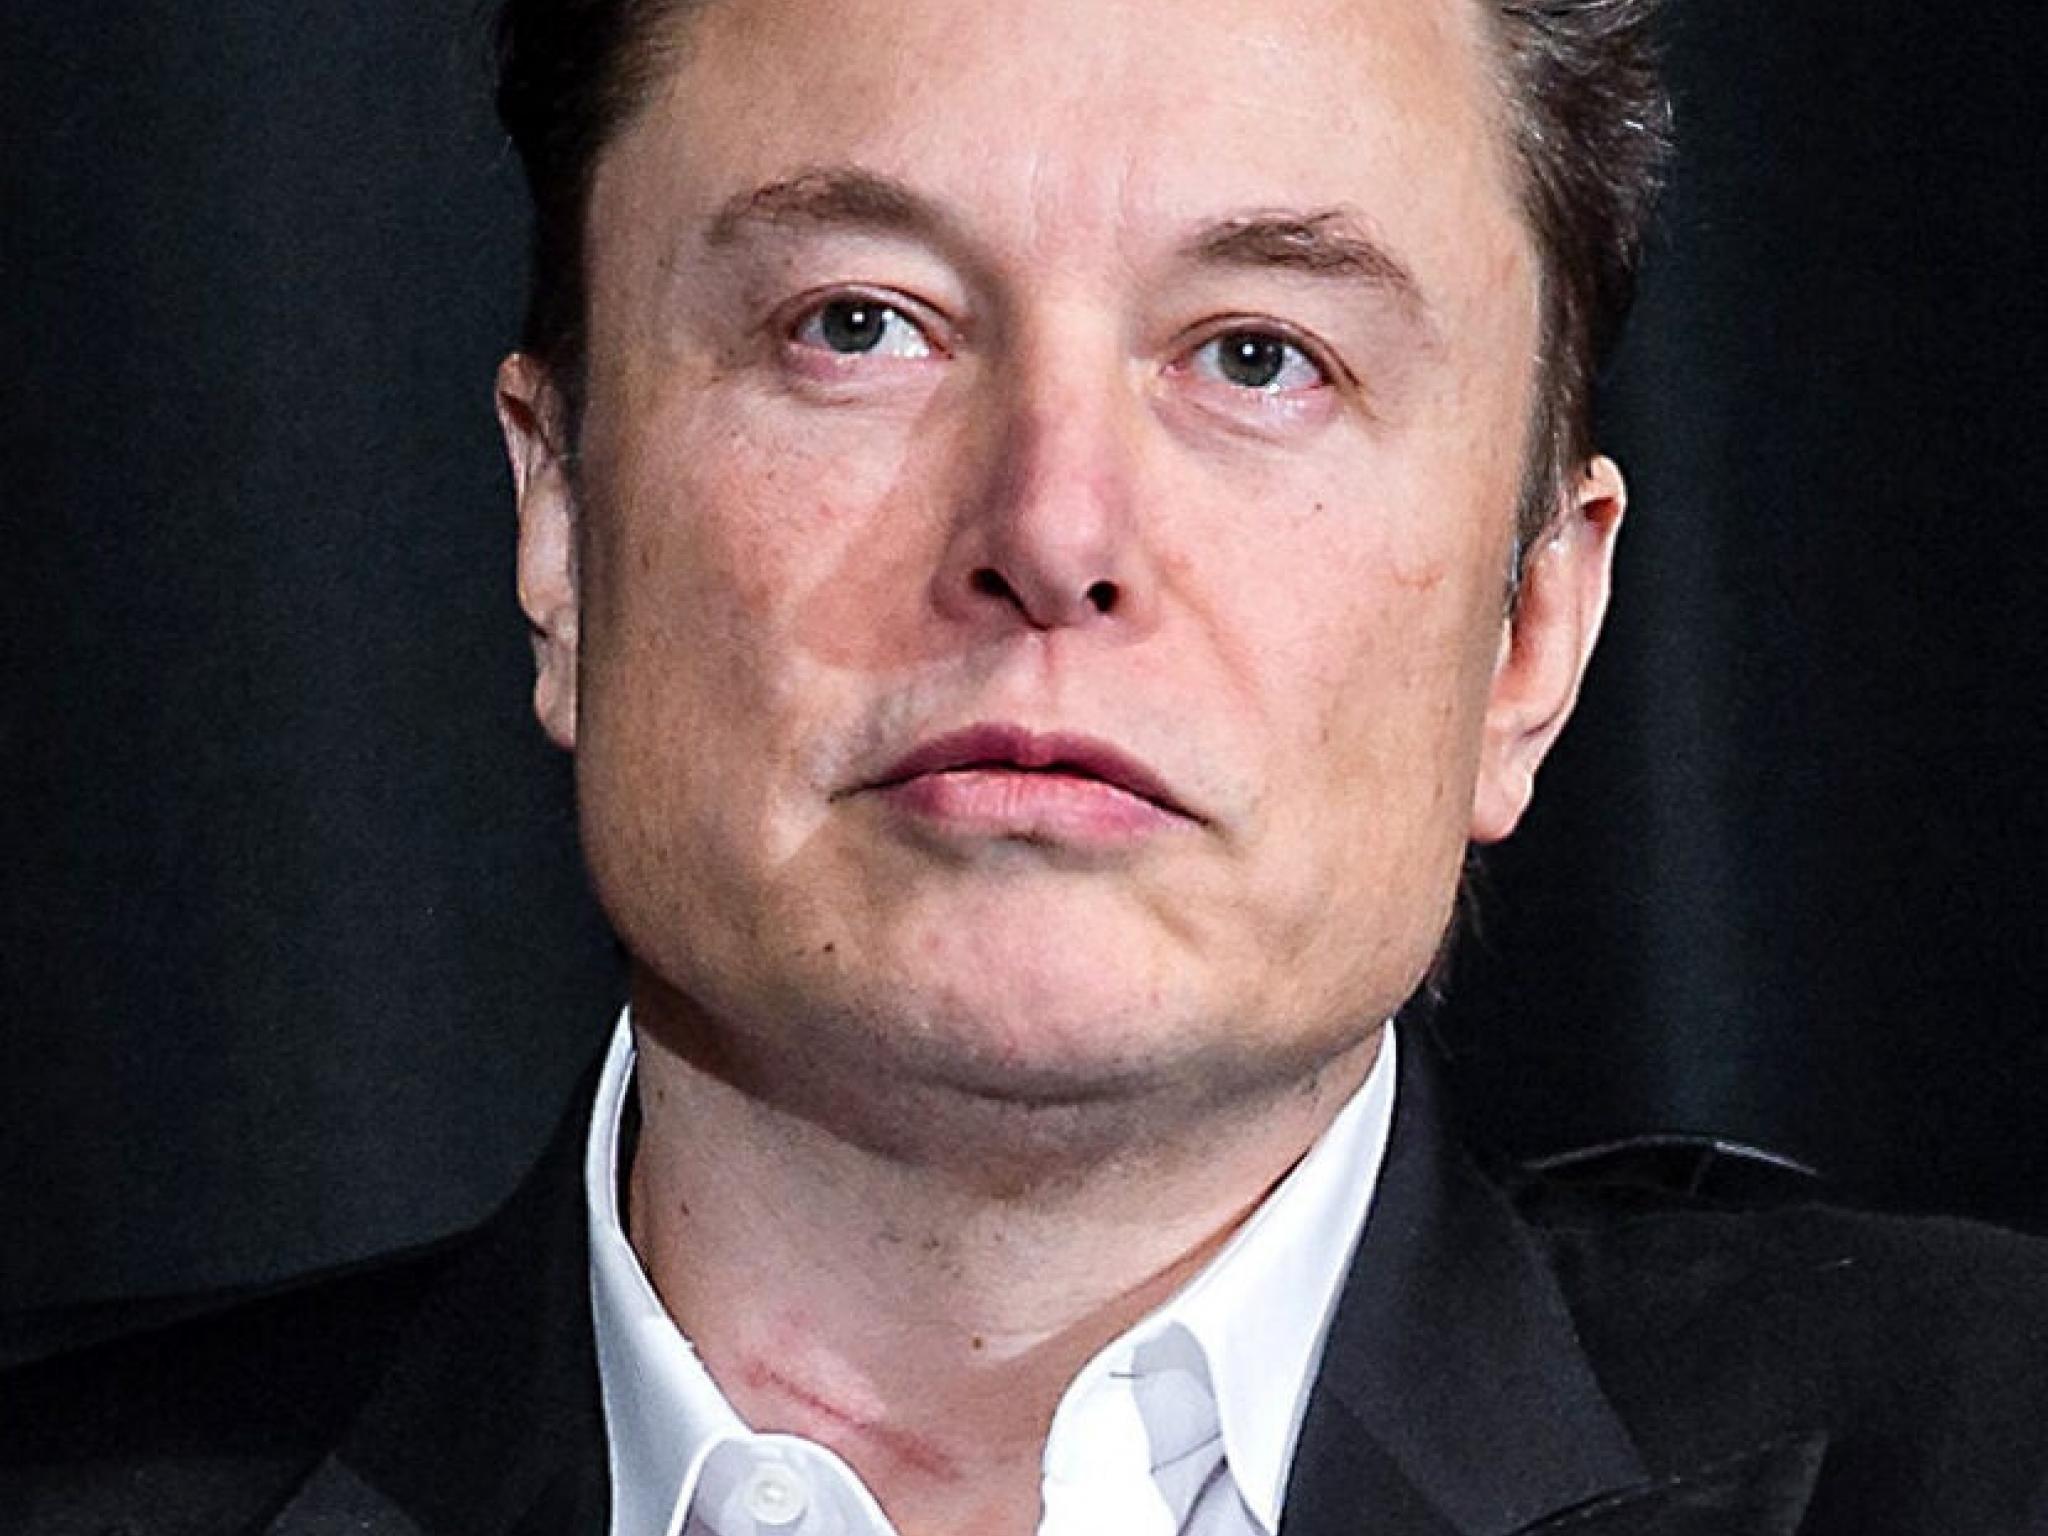  elon-musk-finds-smoking-gun-constitutional-violation-as-jim-jordan-challenges-mark-zuckerbergs-facebook-to-tell-truth-behind-white-house-censorship-of-lab-leak-theory 